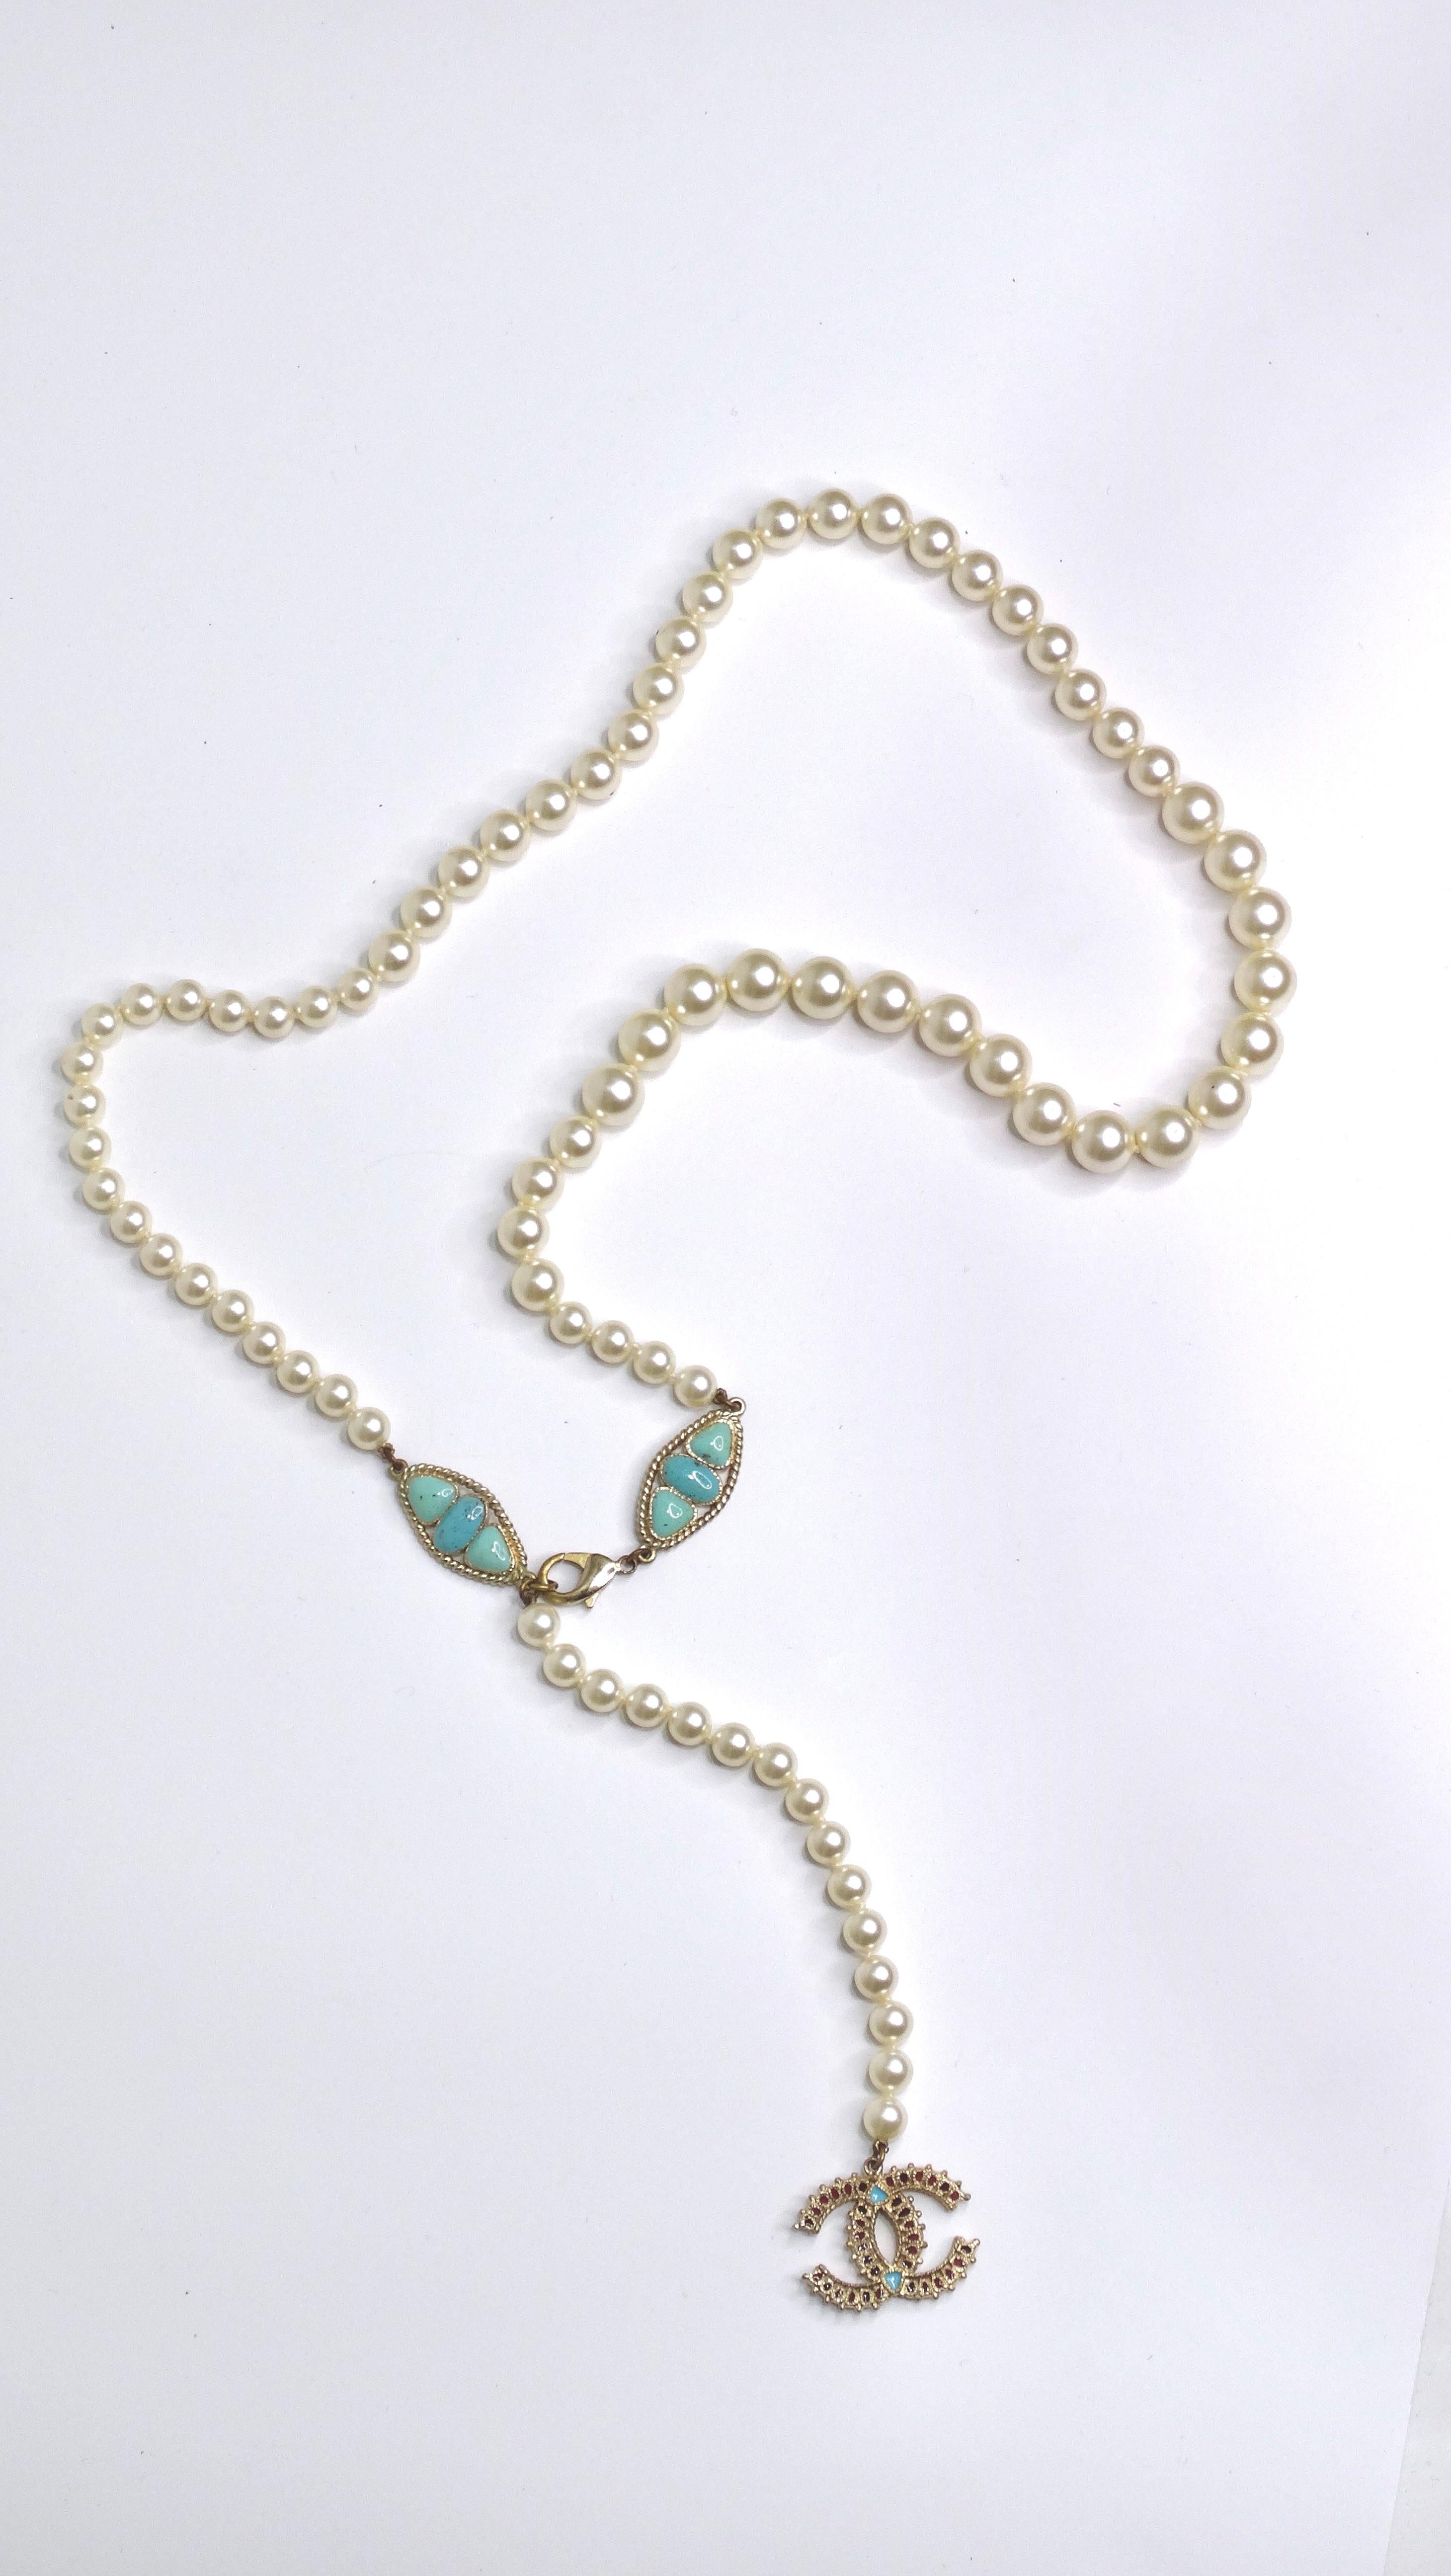 Women's or Men's Chanel Paris Dallas Collection White Pearl & Turquoise Necklace